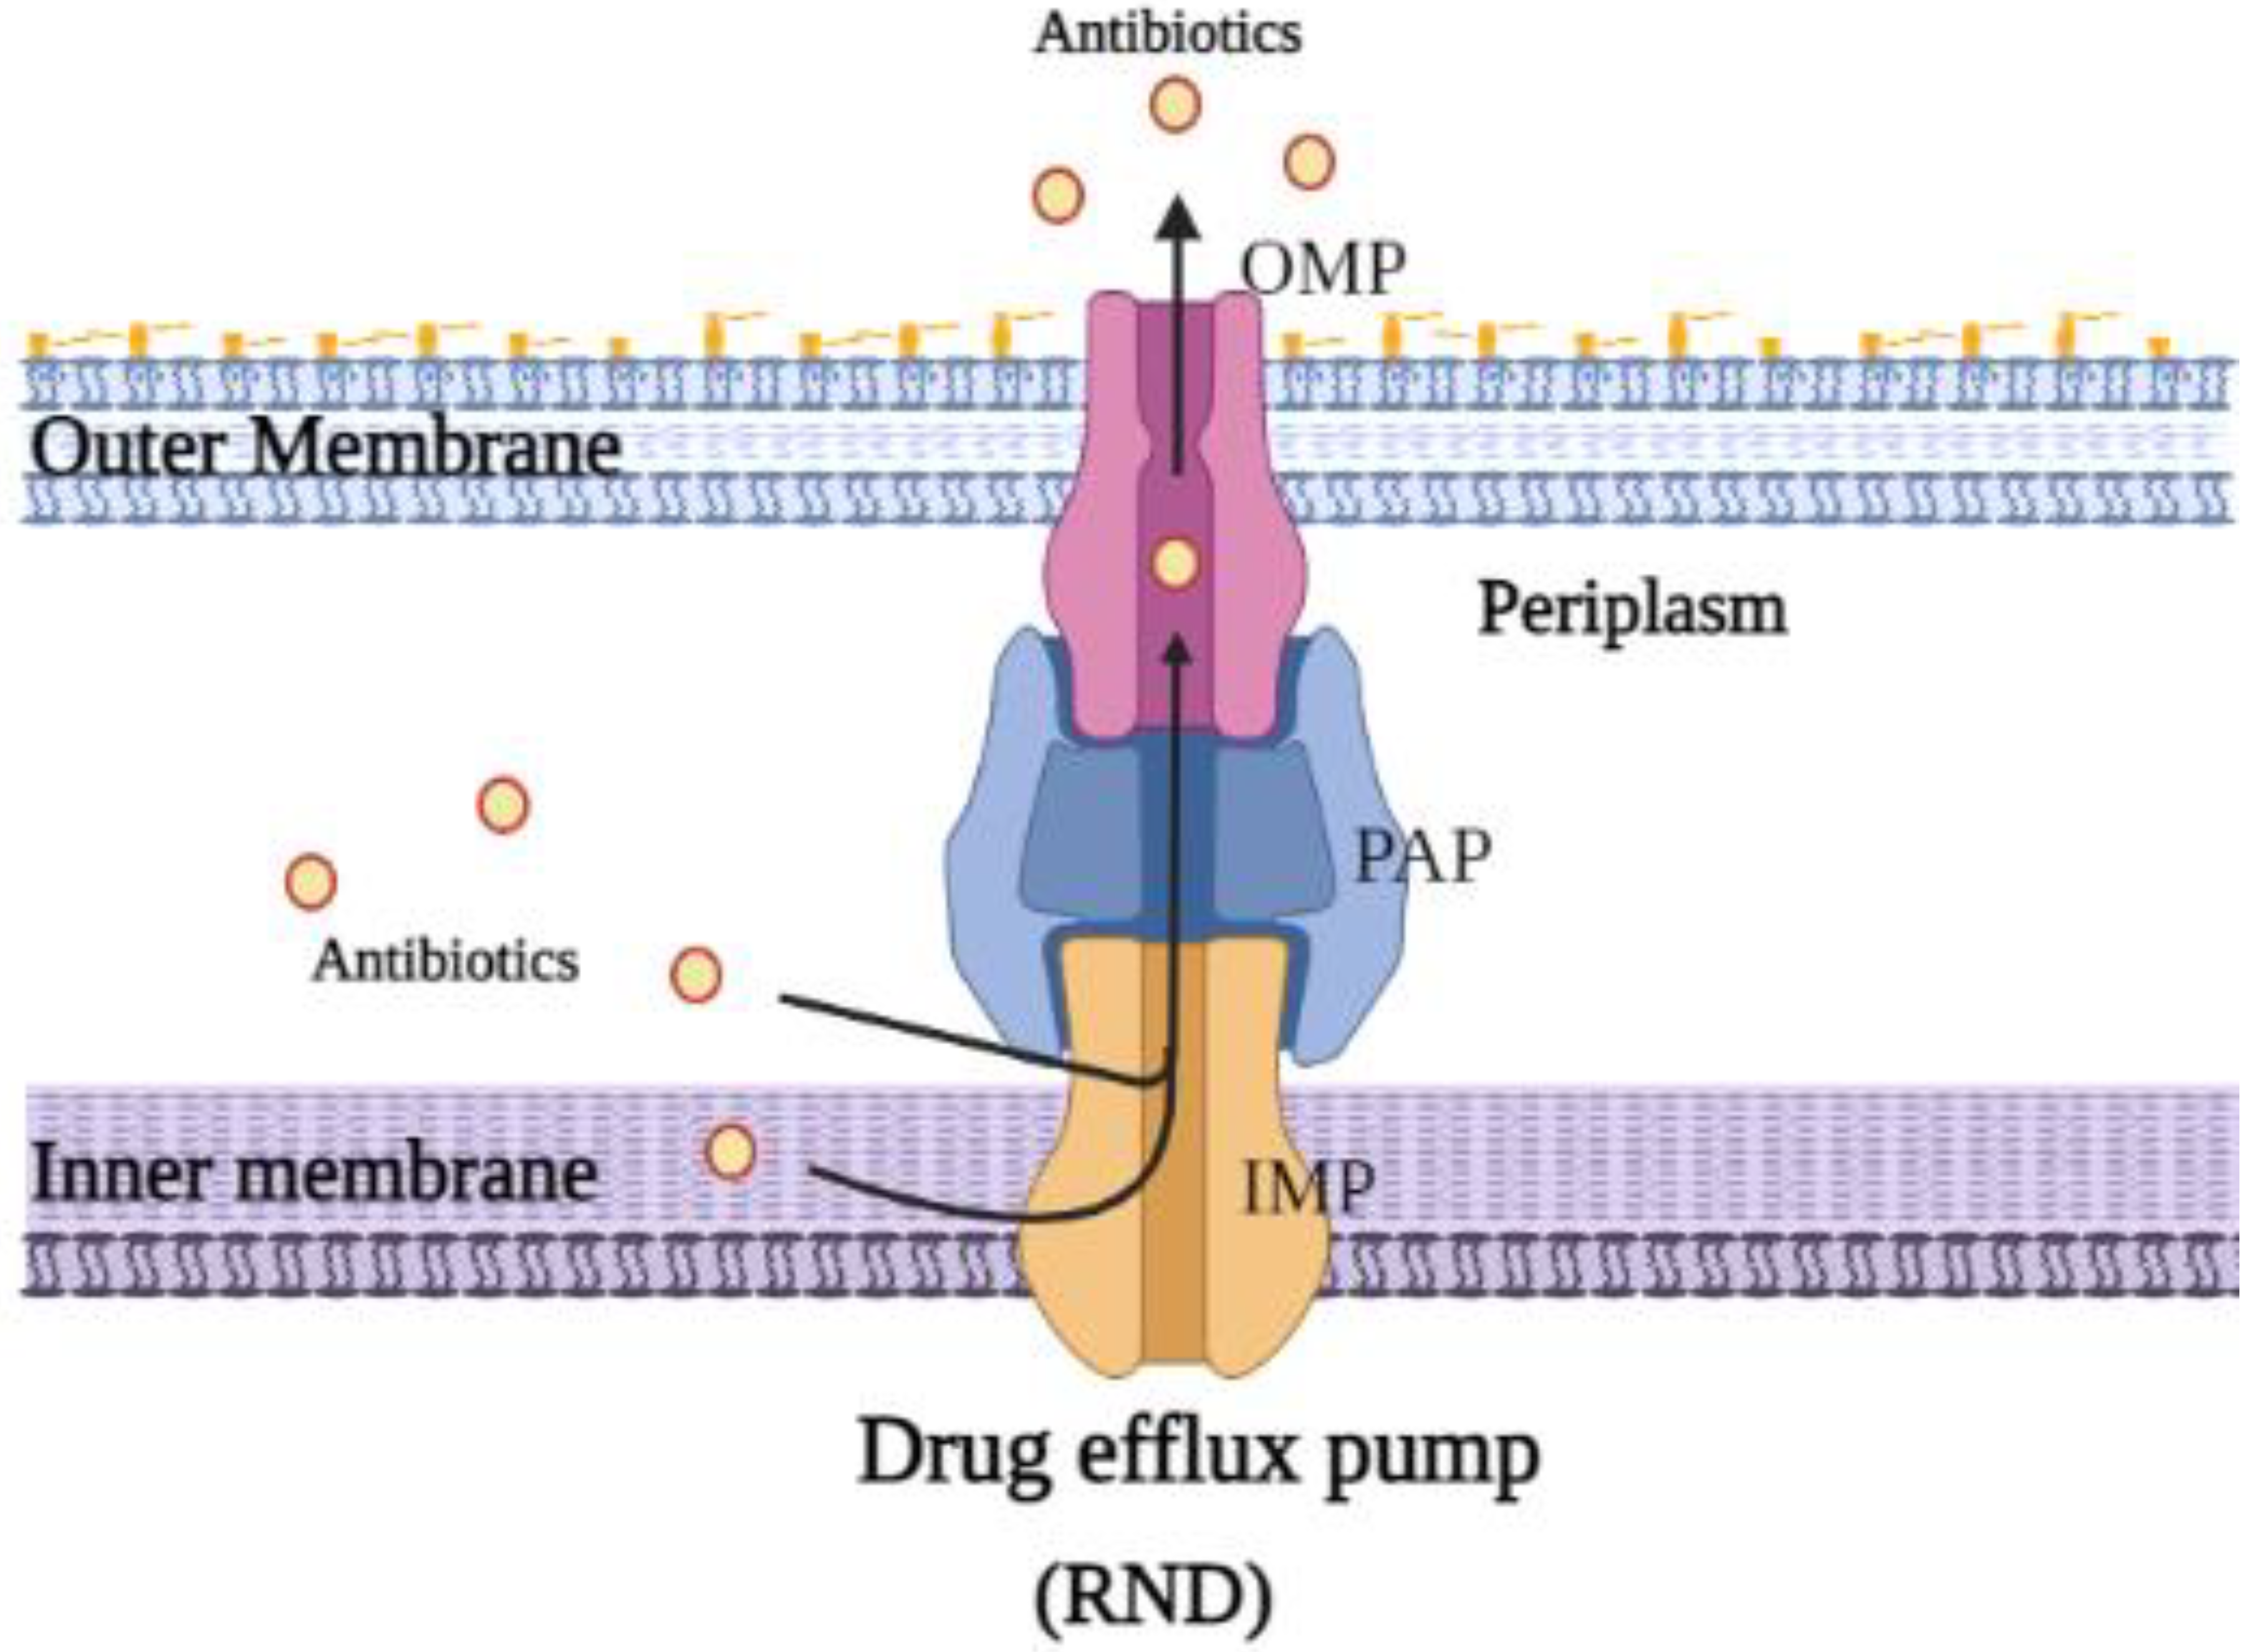 Biology | Free Full-Text | Drug Efflux Pump Inhibitors: A Promising  Approach to Counter Multidrug Resistance in Gram-Negative Pathogens by  Targeting AcrB Protein from AcrAB-TolC Multidrug Efflux Pump from  Escherichia coli